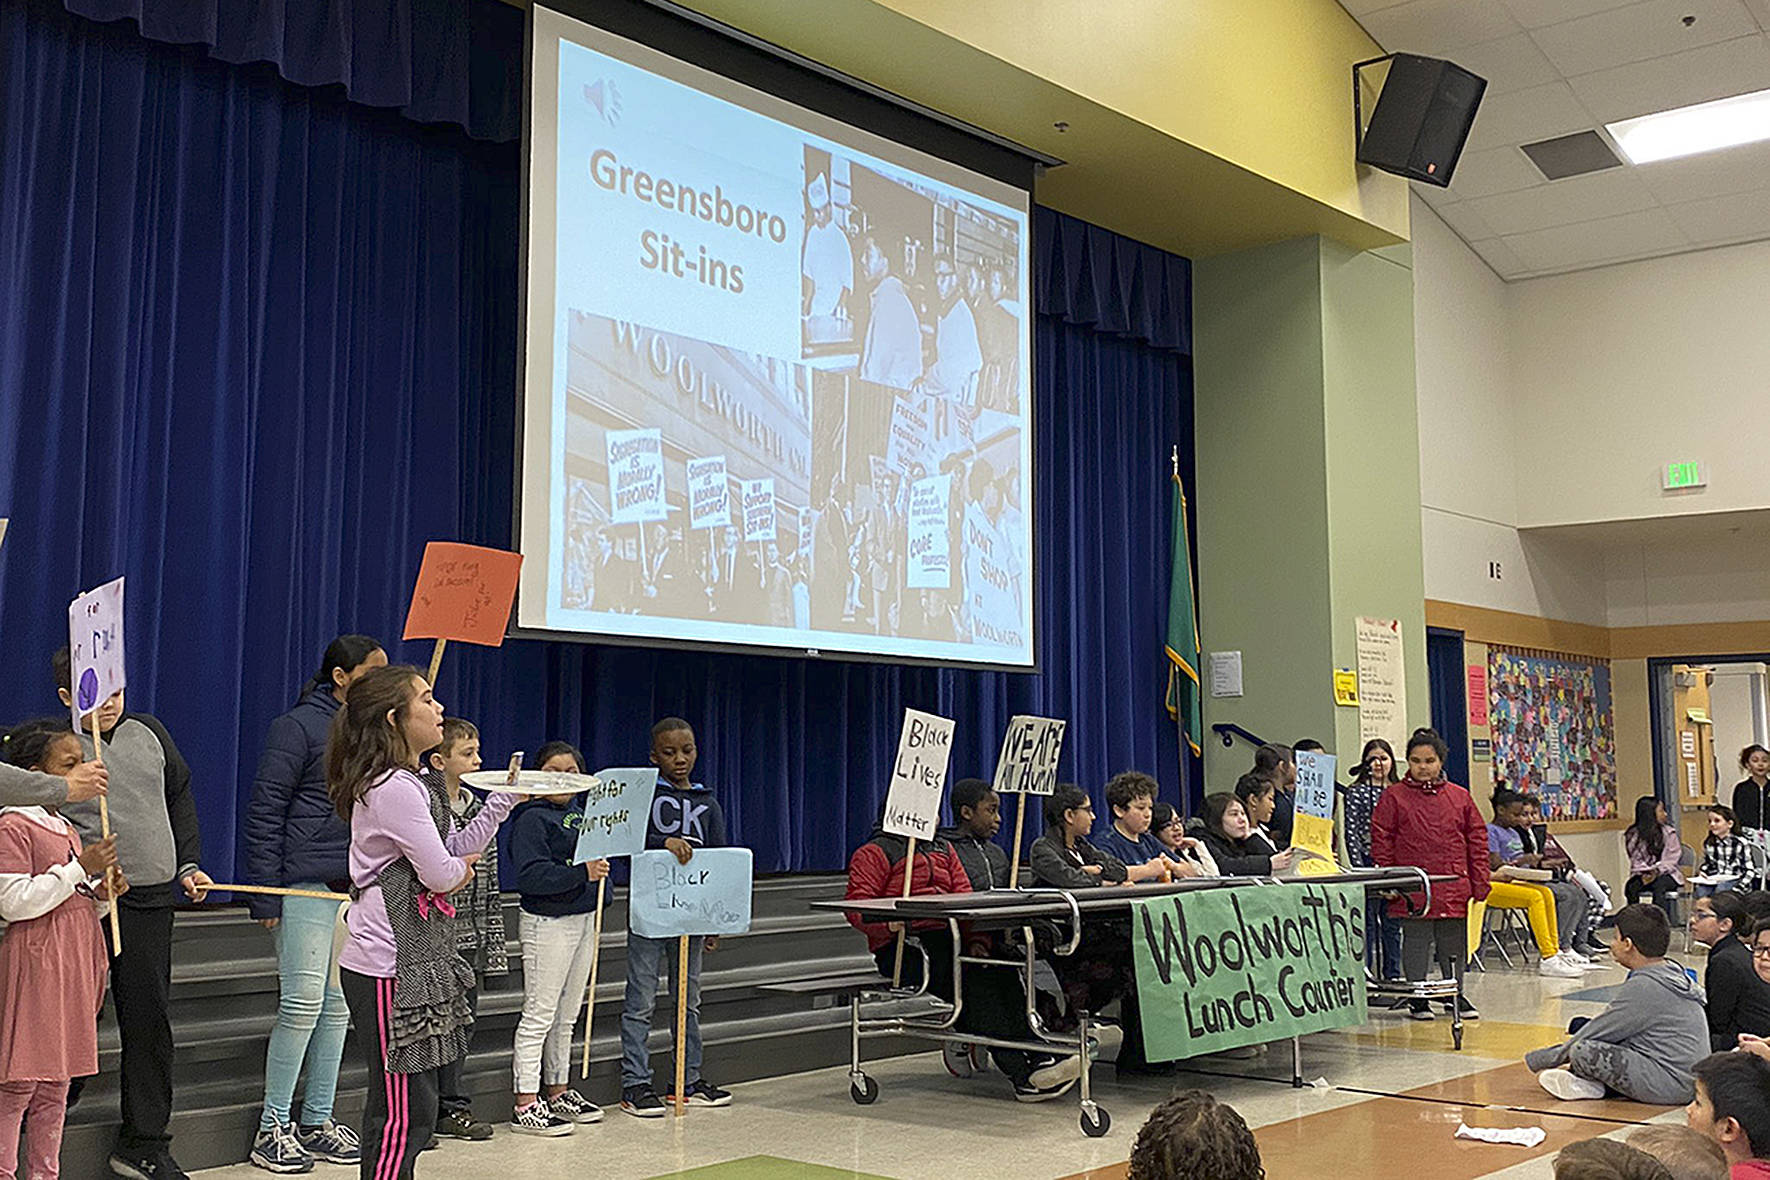 Photos courtesy of Renton School District.                                Students across the district are hosting events, assemblies, celebrations of the life and work of Martin Luther King, Jr. Pictured are Benson Hill Elementary students reenacting lunch counter sit-ins and other Civil Rights actions against segregation. The district stated in a tweet that schools blend these activities into existing work to teach students history; Black scholars in math, science, medicine; segregation; race; and other topics of U.S. social and political climate.